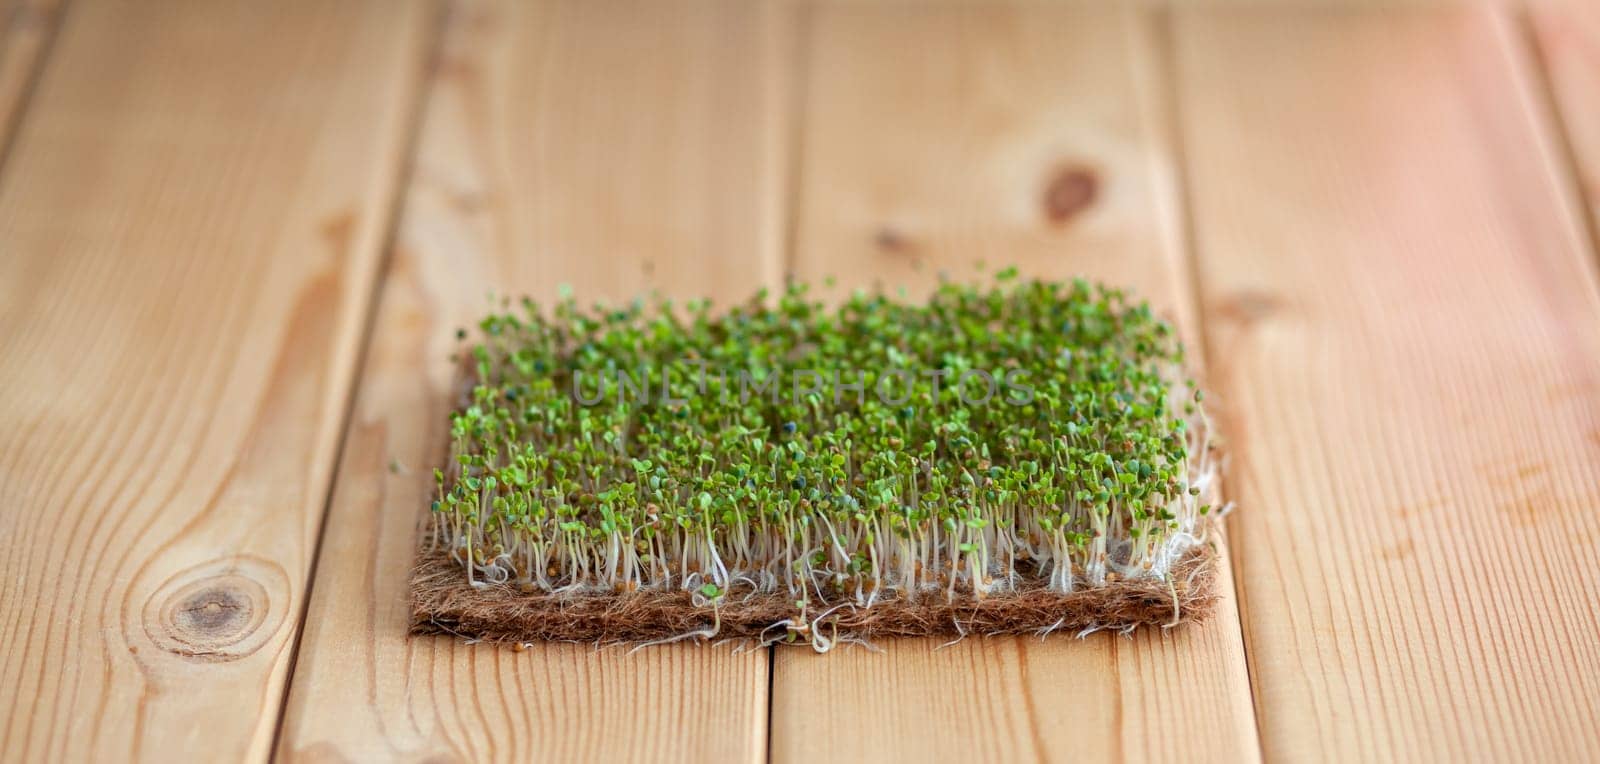 Close-up of micro-greens of mustard, arugula and other plants at home. Growing mustard and arugula sprouts in close-up at home. The concept of vegan and healthy food. Sprouted seeds, micro-greens